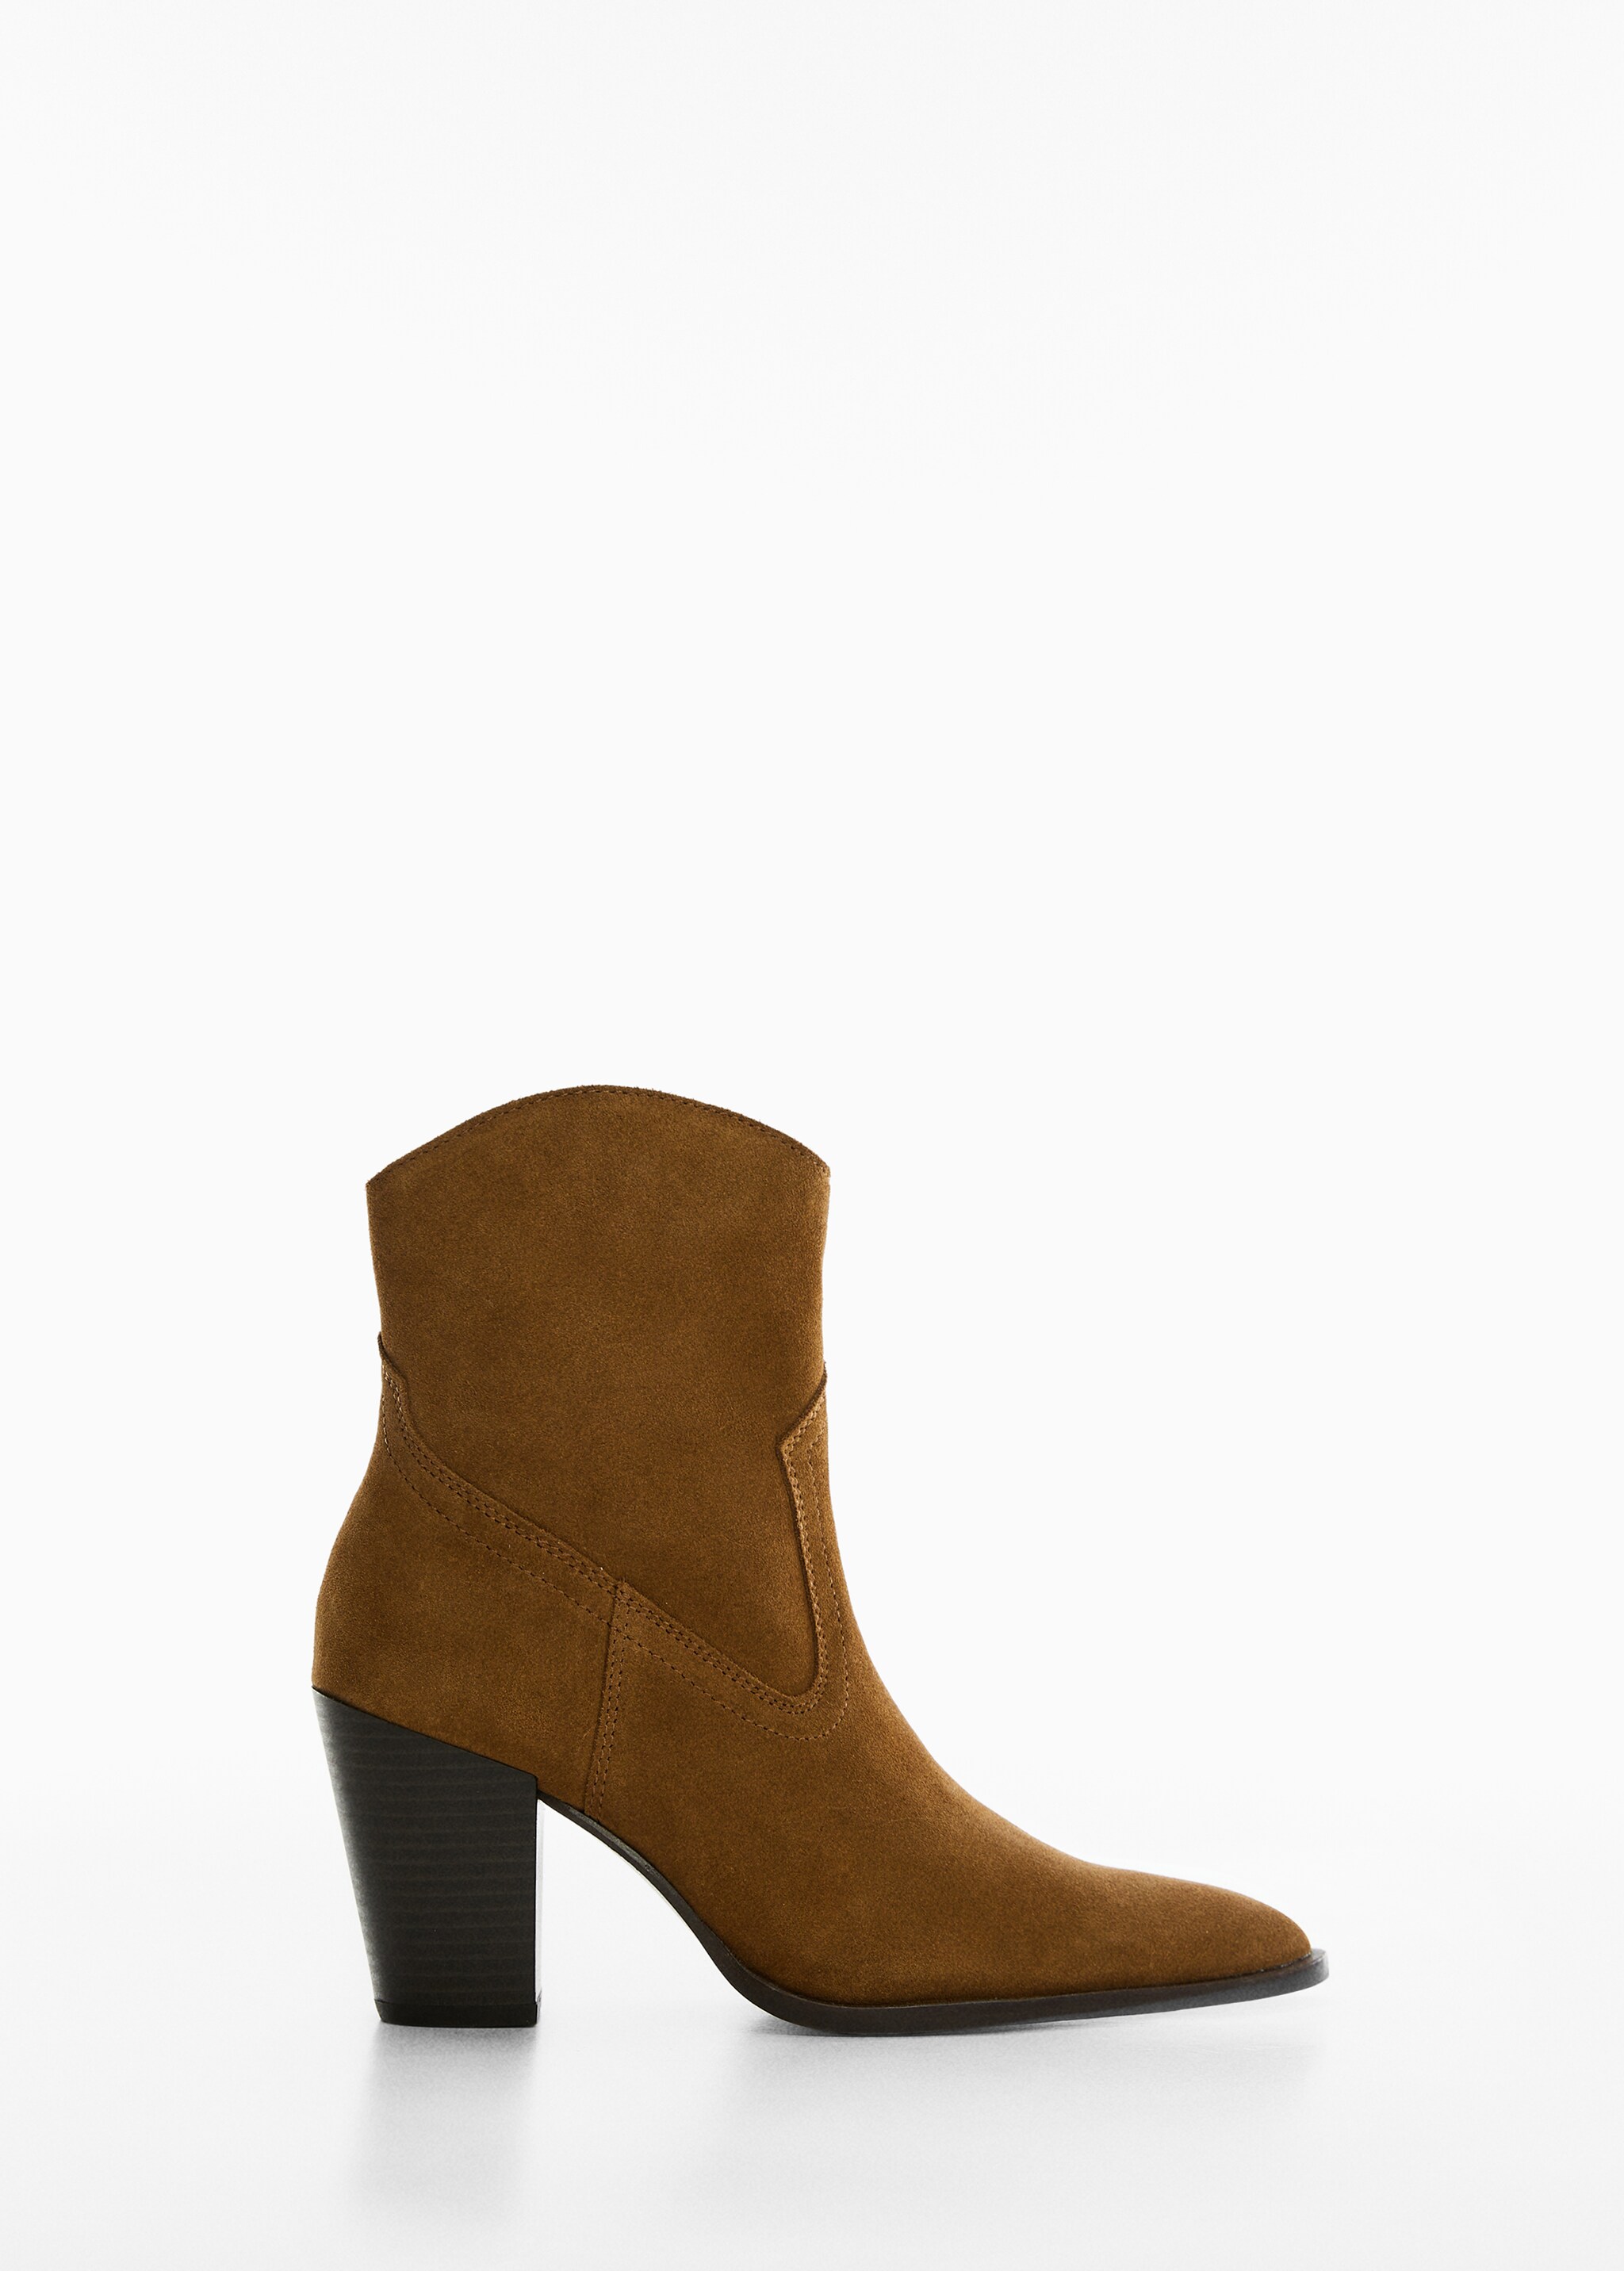 Suede leather ankle boots - Article without model